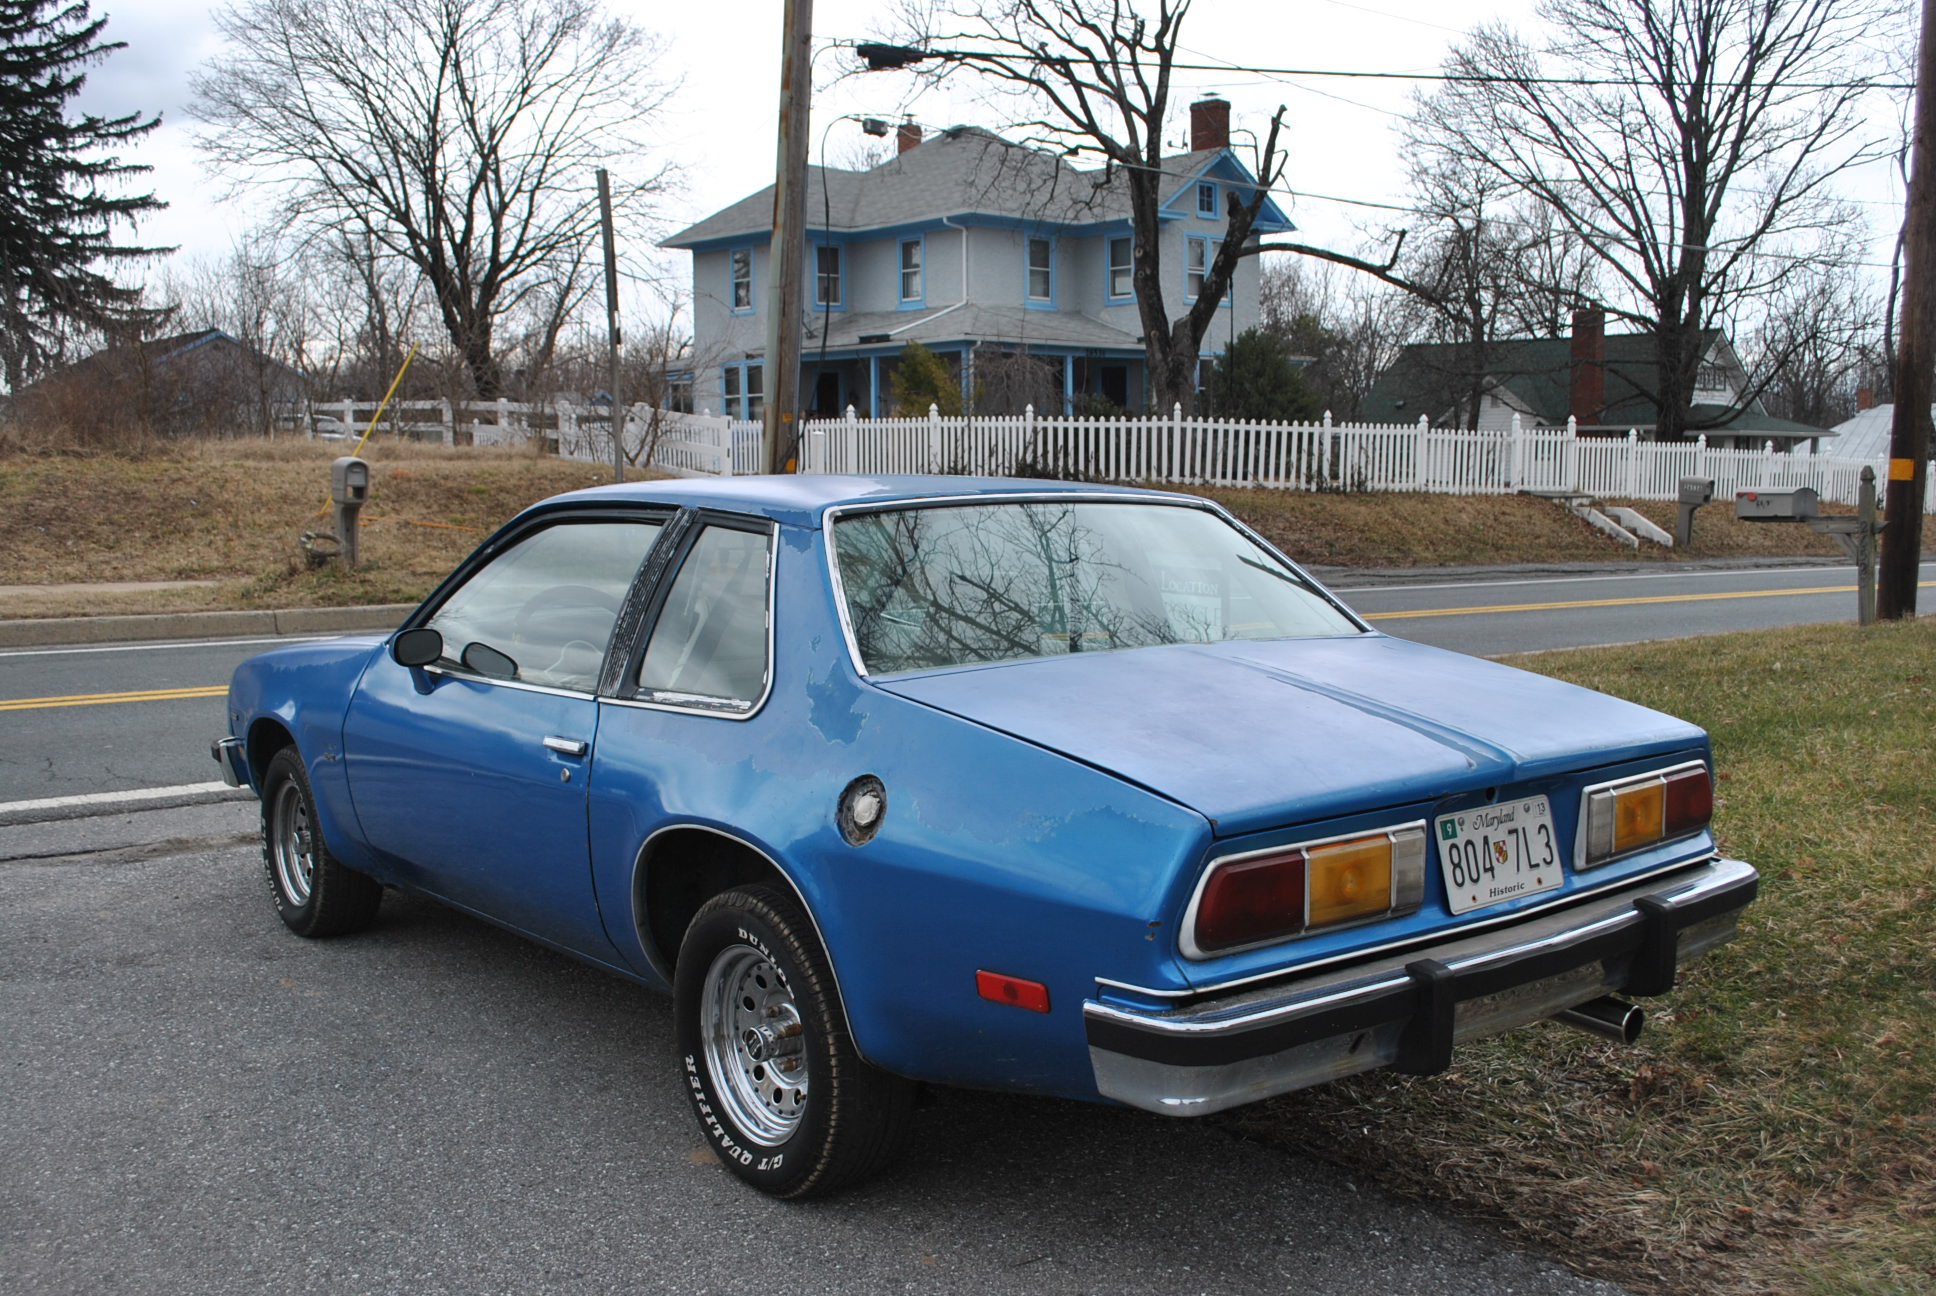 1977 Chevrolet Monza 2+2 Town Coupe Flickr - Photo Sharing! 